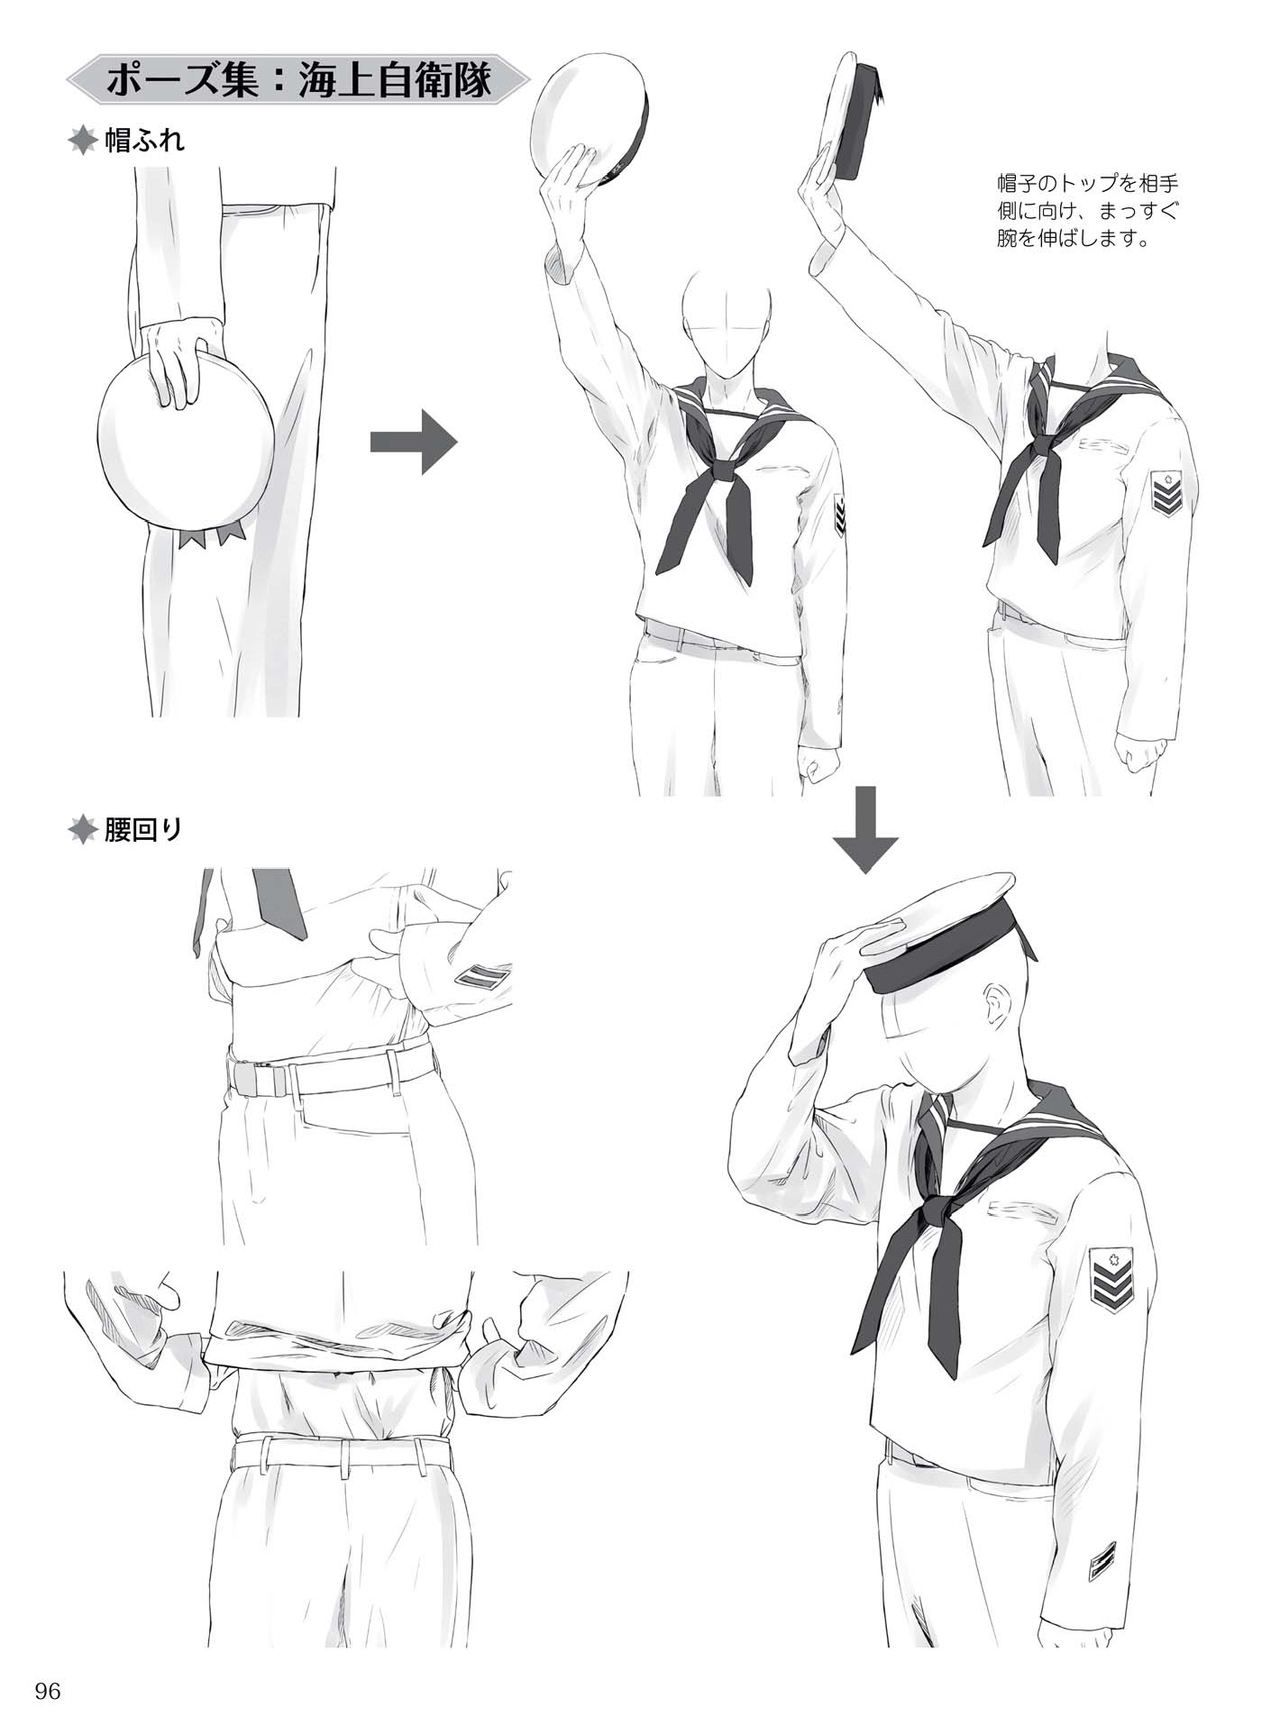 How to draw military uniforms and uniforms From Self-Defense Forces 軍服・制服の描き方 アメリカ軍・自衛隊の制服から戦闘服まで 99